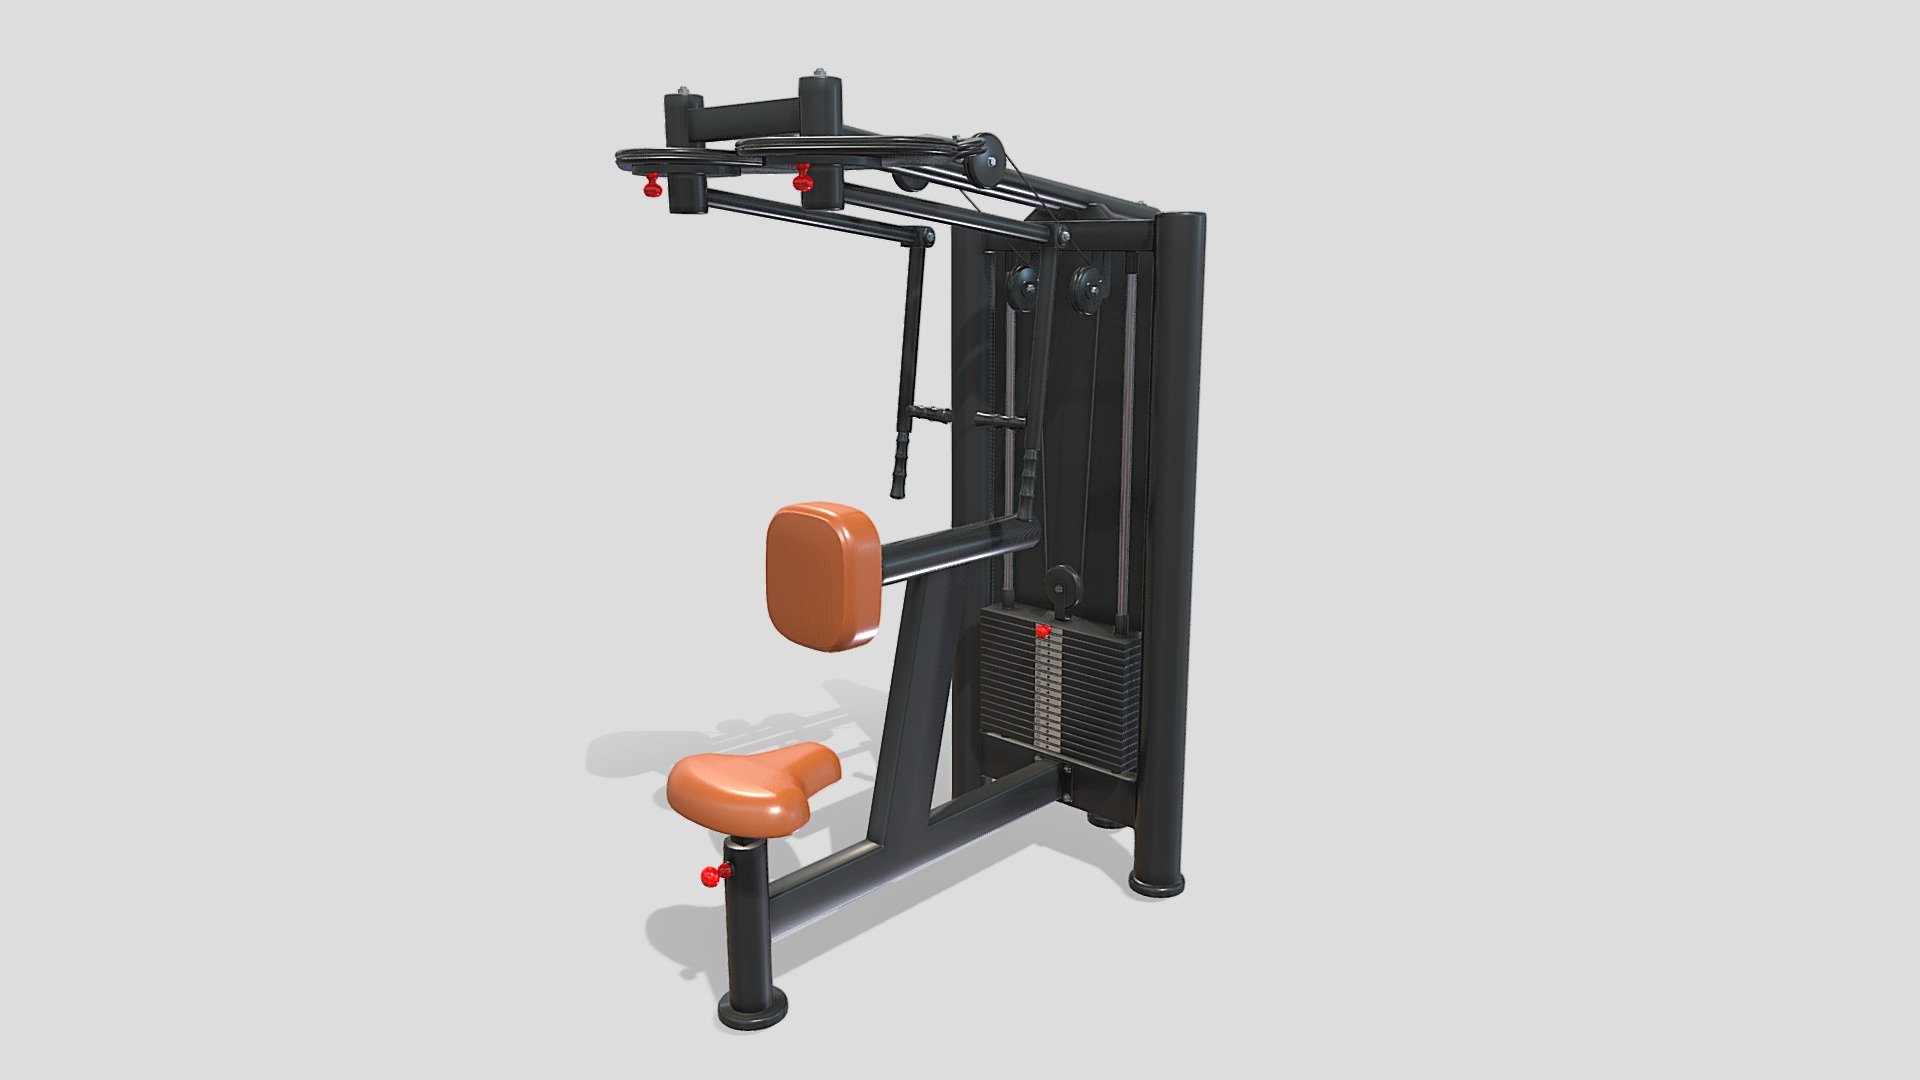 Gym machine 3d model built to real size, rendered with Cycles in Blender, as per seen on attached images. 

File formats:
-.blend, rendered with cycles, as seen in the images;
-.obj, with materials applied;
-.dae, with materials applied;
-.fbx, with materials applied;
-.stl;

Files come named appropriately and split by file format.

3D Software:
The 3D model was originally created in Blender 3.1 and rendered with Cycles.

Materials and textures:
The models have materials applied in all formats, and are ready to import and render.
Materials are image based using PBR, the model comes with five 4k png image textures.

Preview scenes:
The preview images are rendered in Blender using its built-in render engine &lsquo;Cycles'.
Note that the blend files come directly with the rendering scene included and the render command will generate the exact result as seen in previews.

General:
The models are built mostly out of quads.

For any problems please feel free to contact me.

Don't forget to rate and enjoy! - Back swing machine - Buy Royalty Free 3D model by dragosburian 3d model